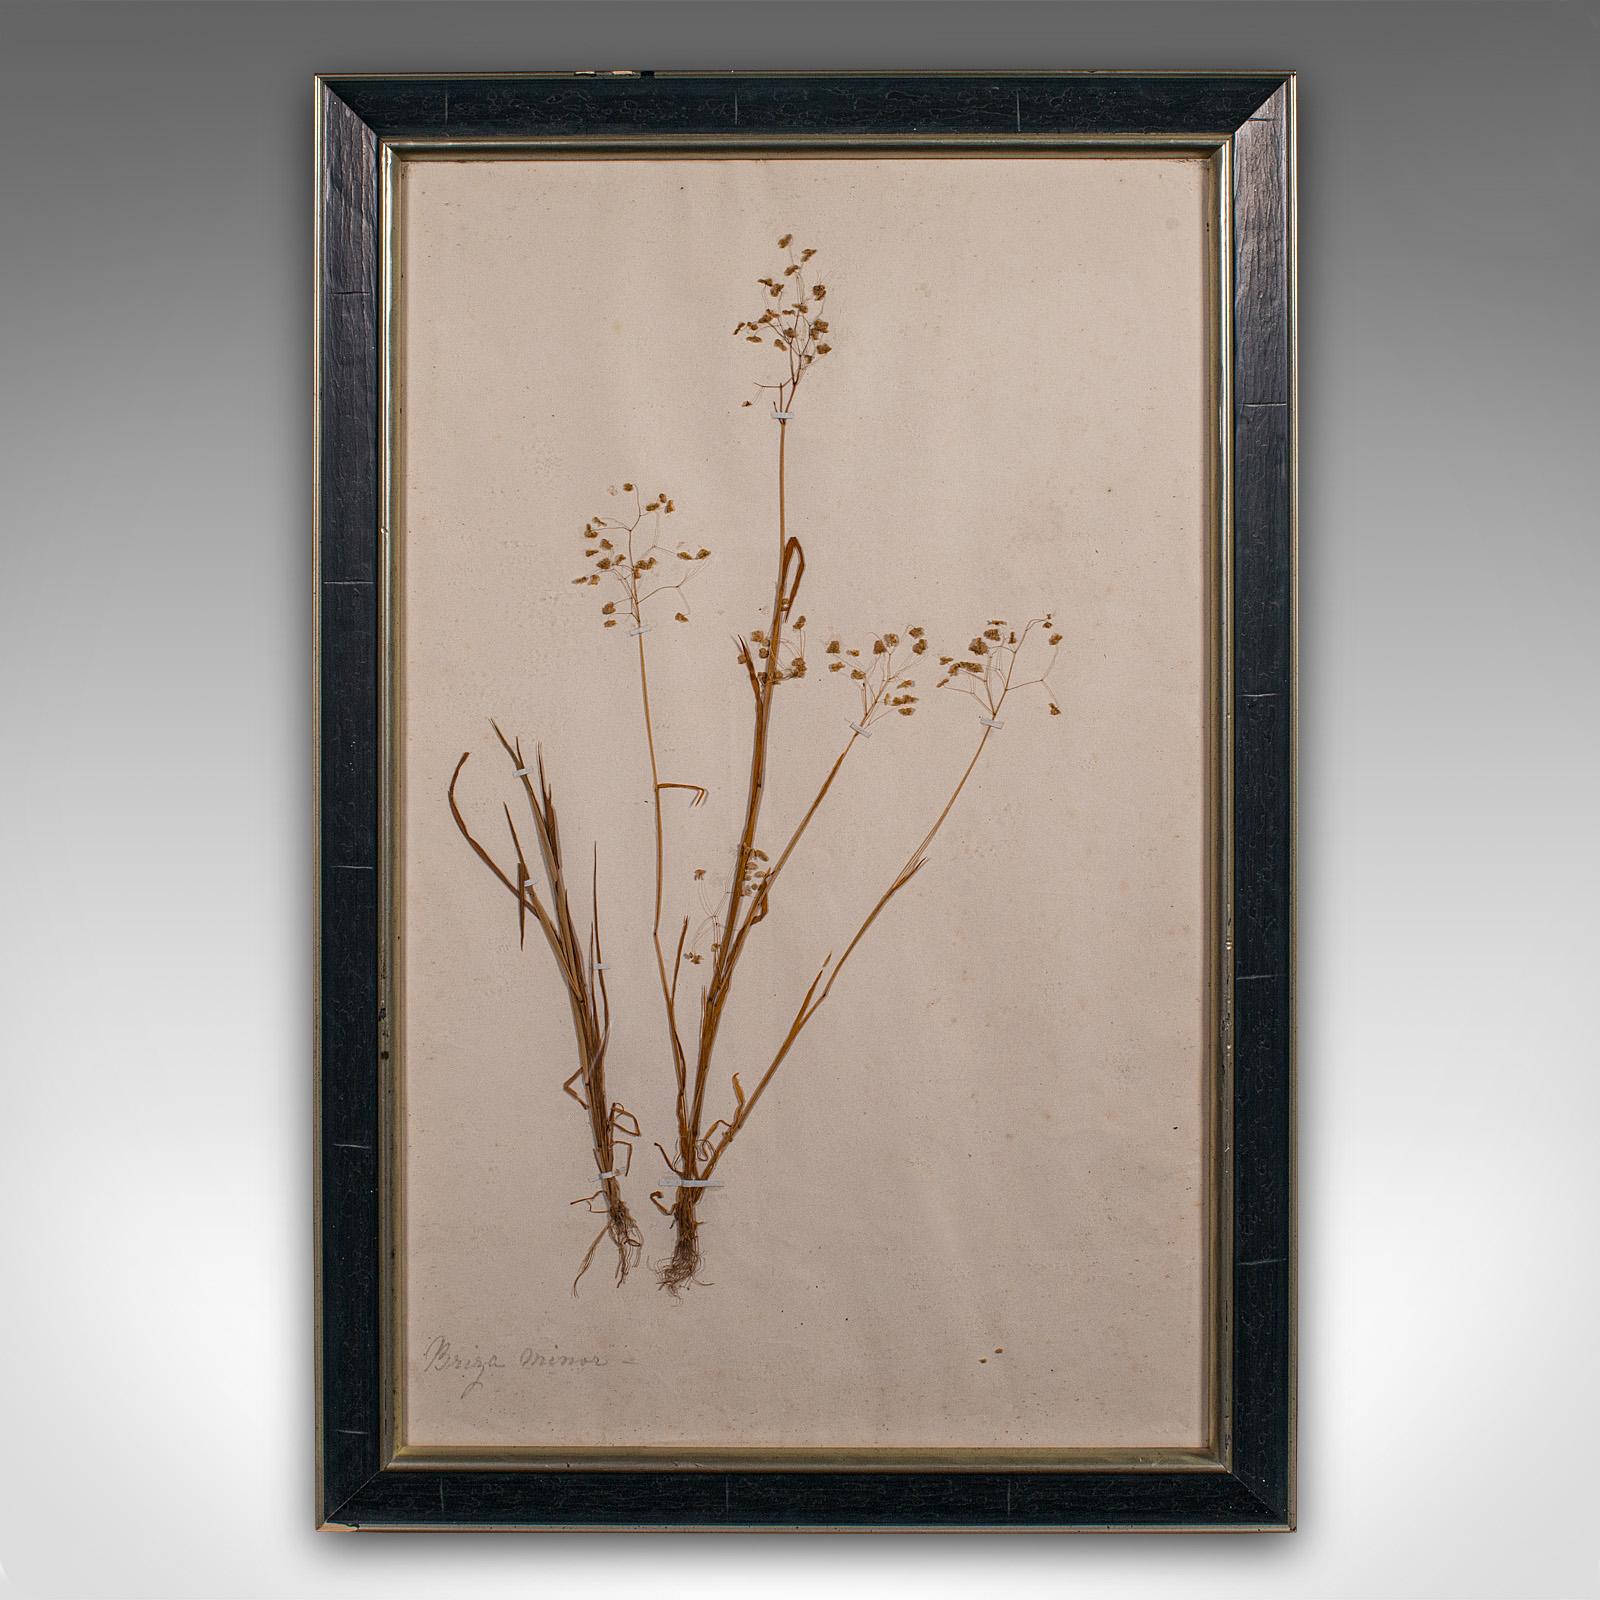 This is an antique set of 6 botanist's specimens. An English, mounted dried grass and flower collection, dating to the early Victorian period, circa 1850.

Delightfully preserved Victorian plant life, neatly presented
Displaying a desirable aged